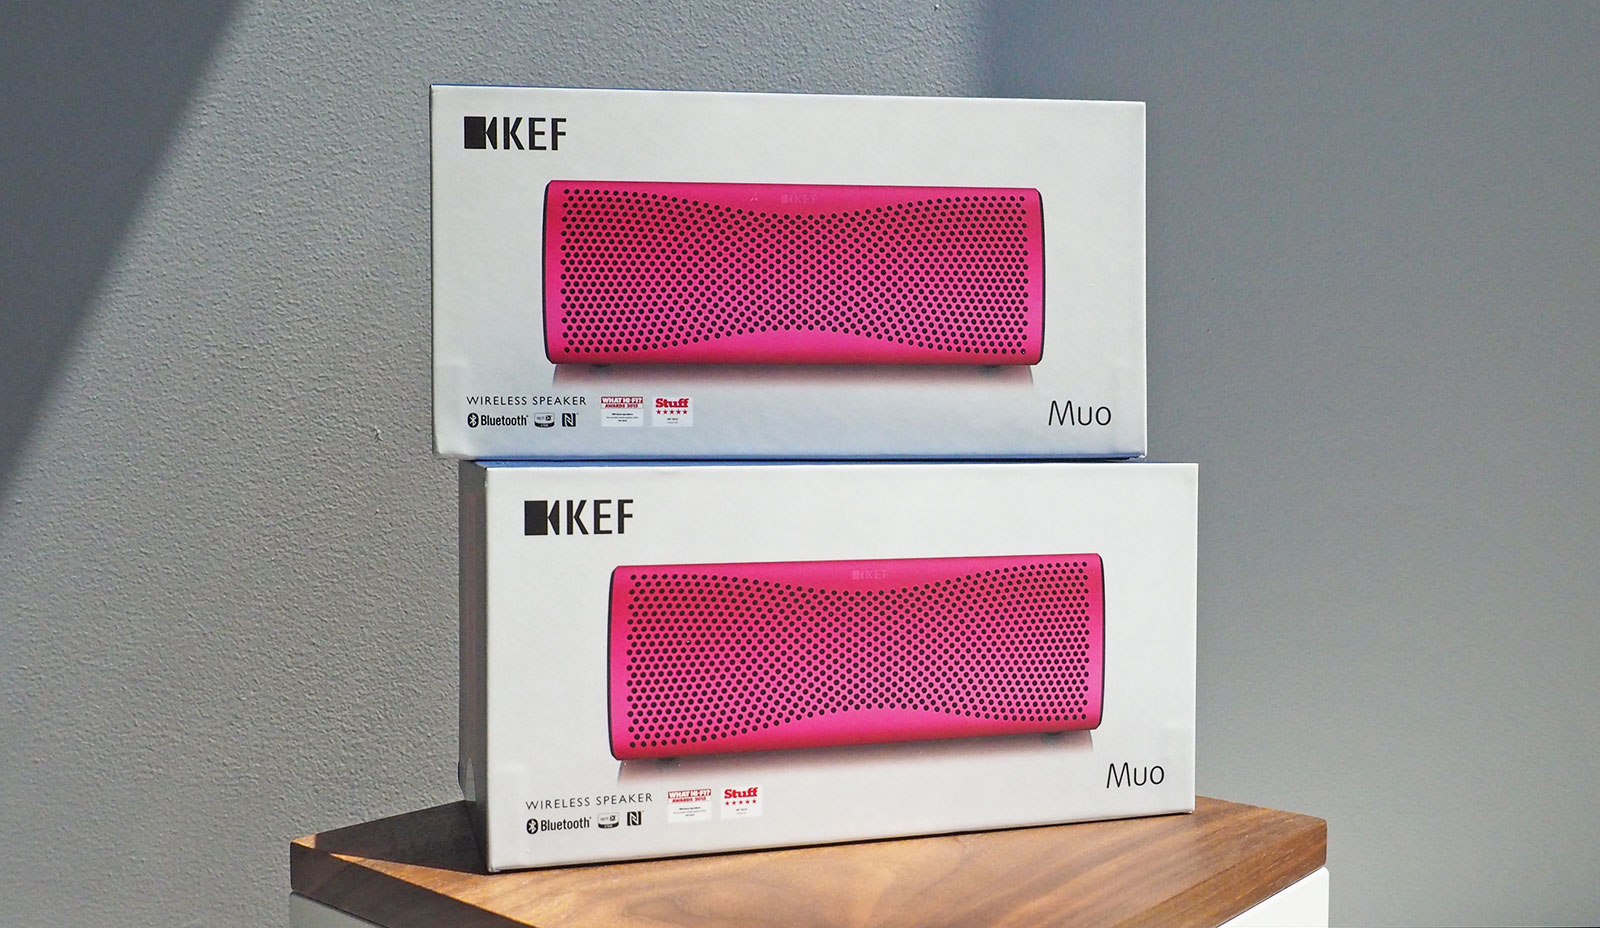 Engadget giveaway: Win a pair of Muo speakers courtesy of Kef!